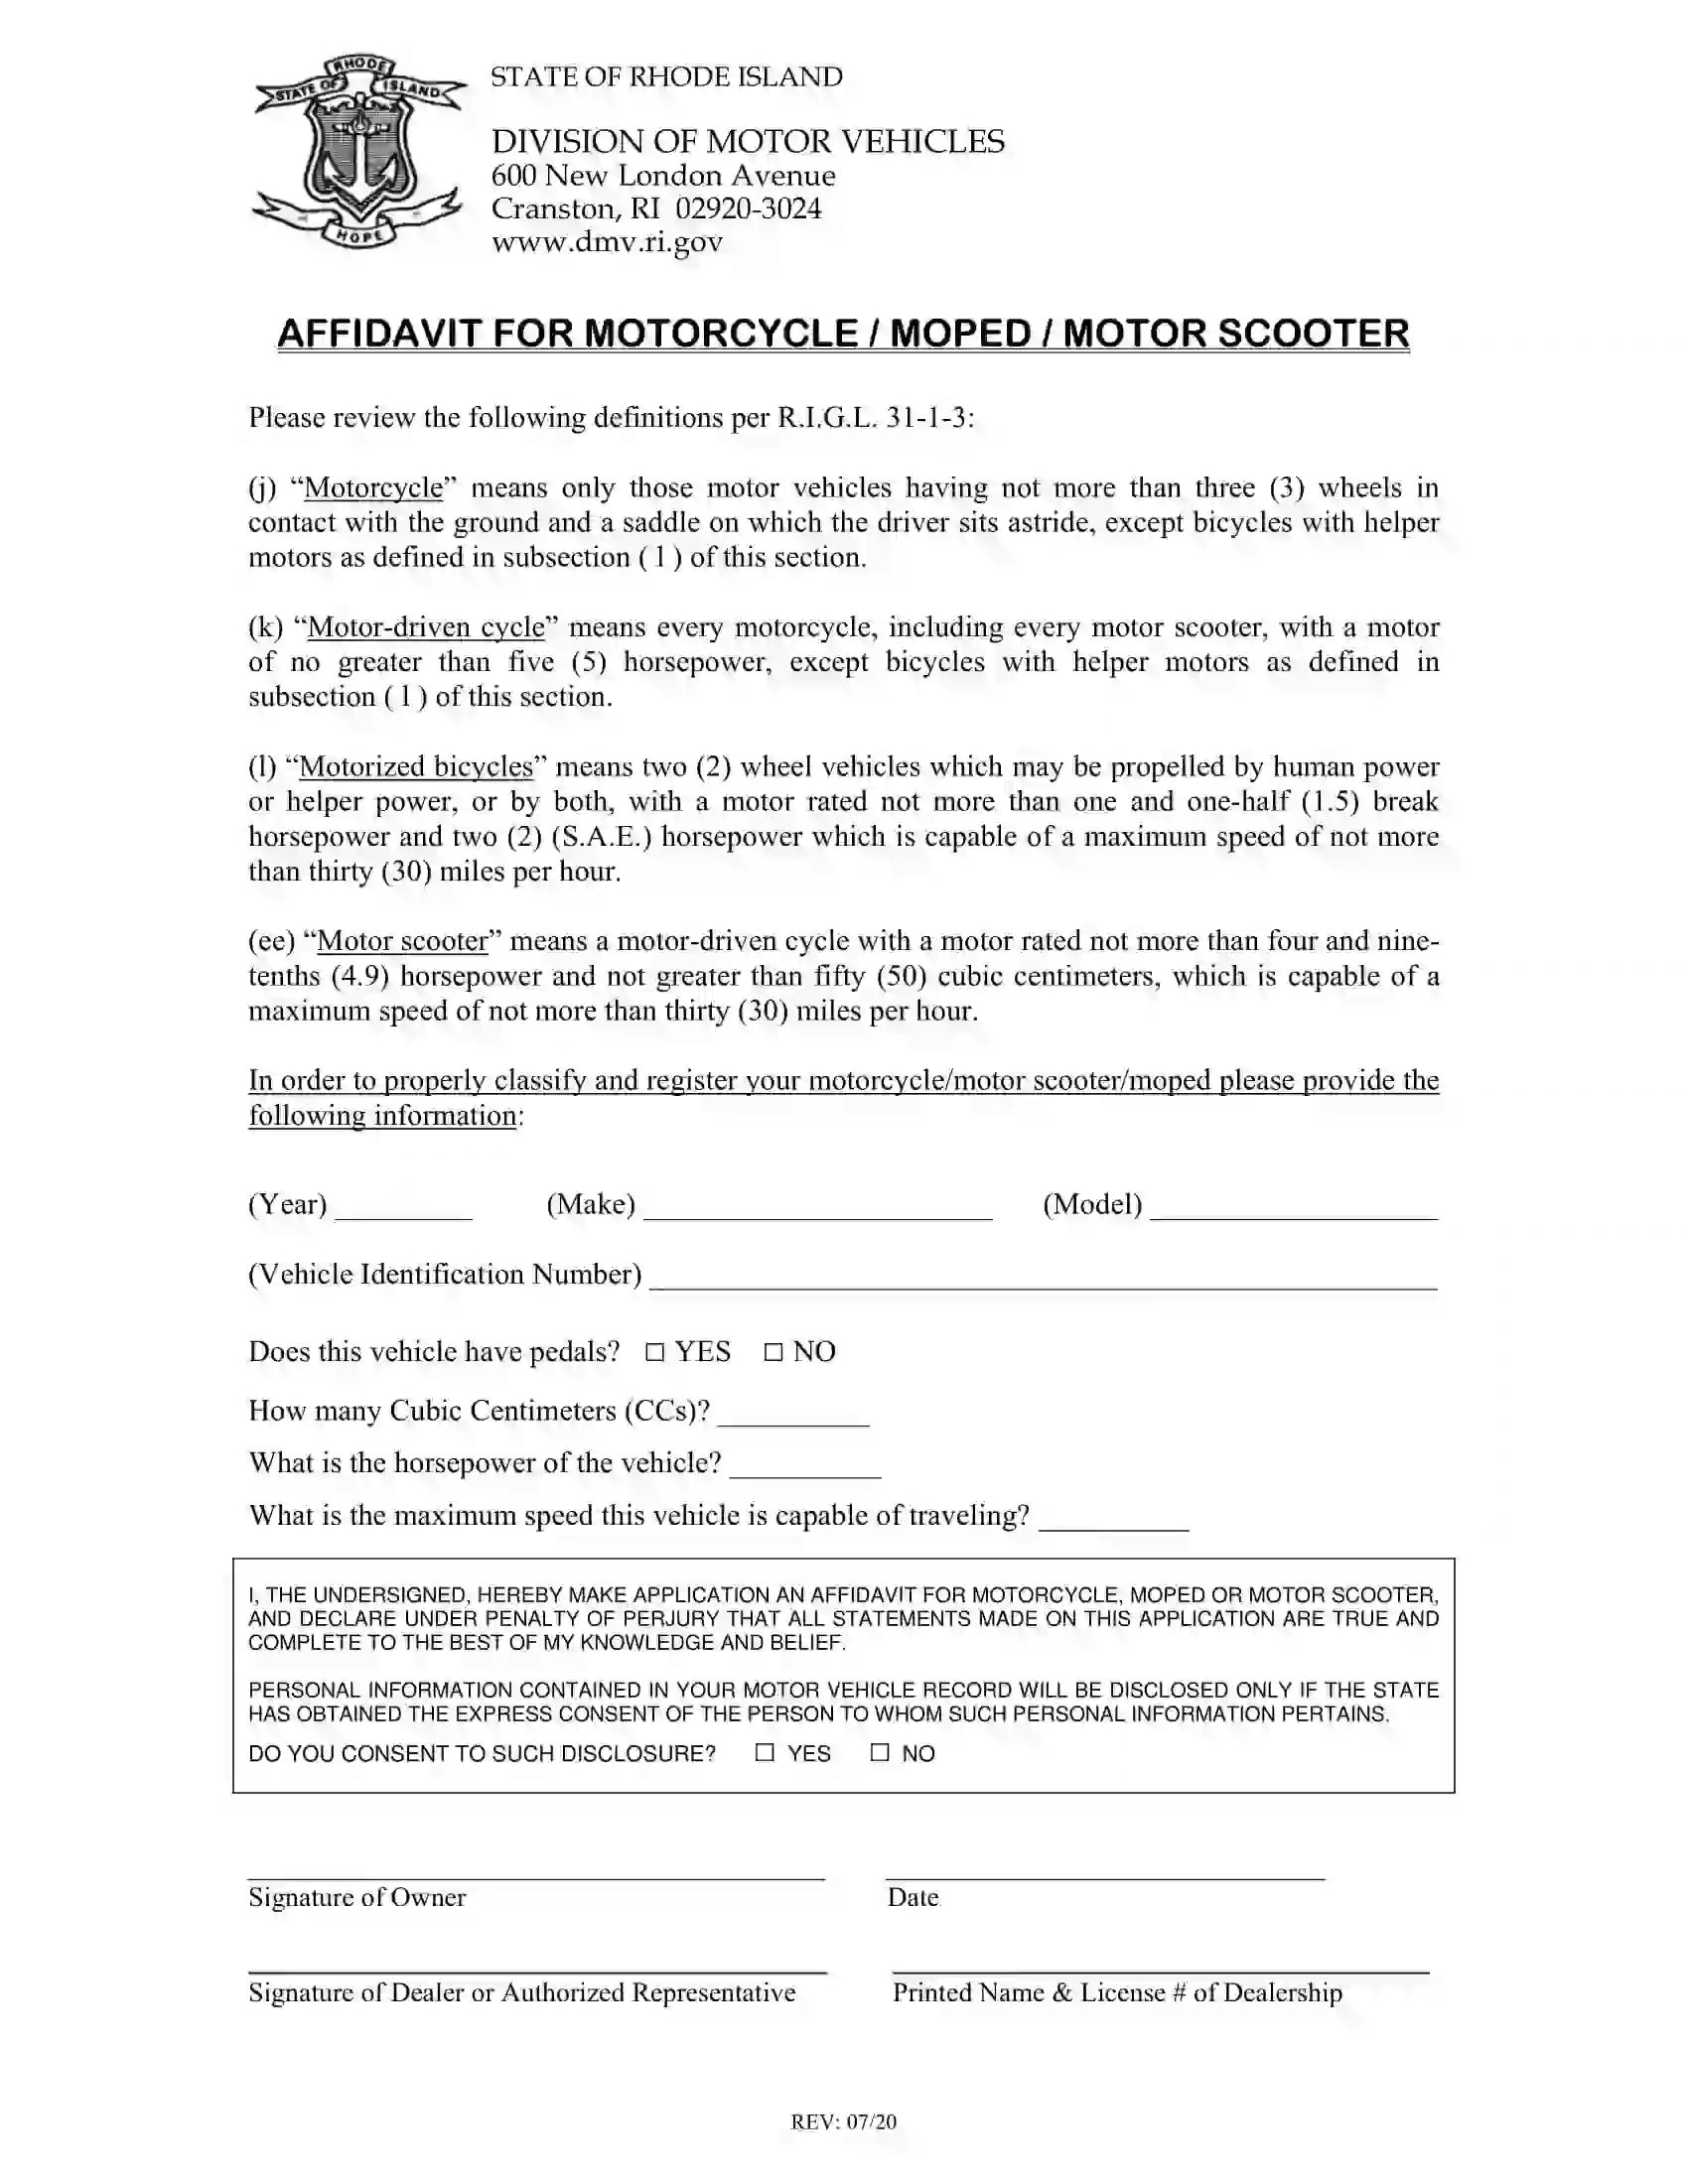 (Vehicle) Affidavit for Motorcycle, Moped, and Motor Scooter